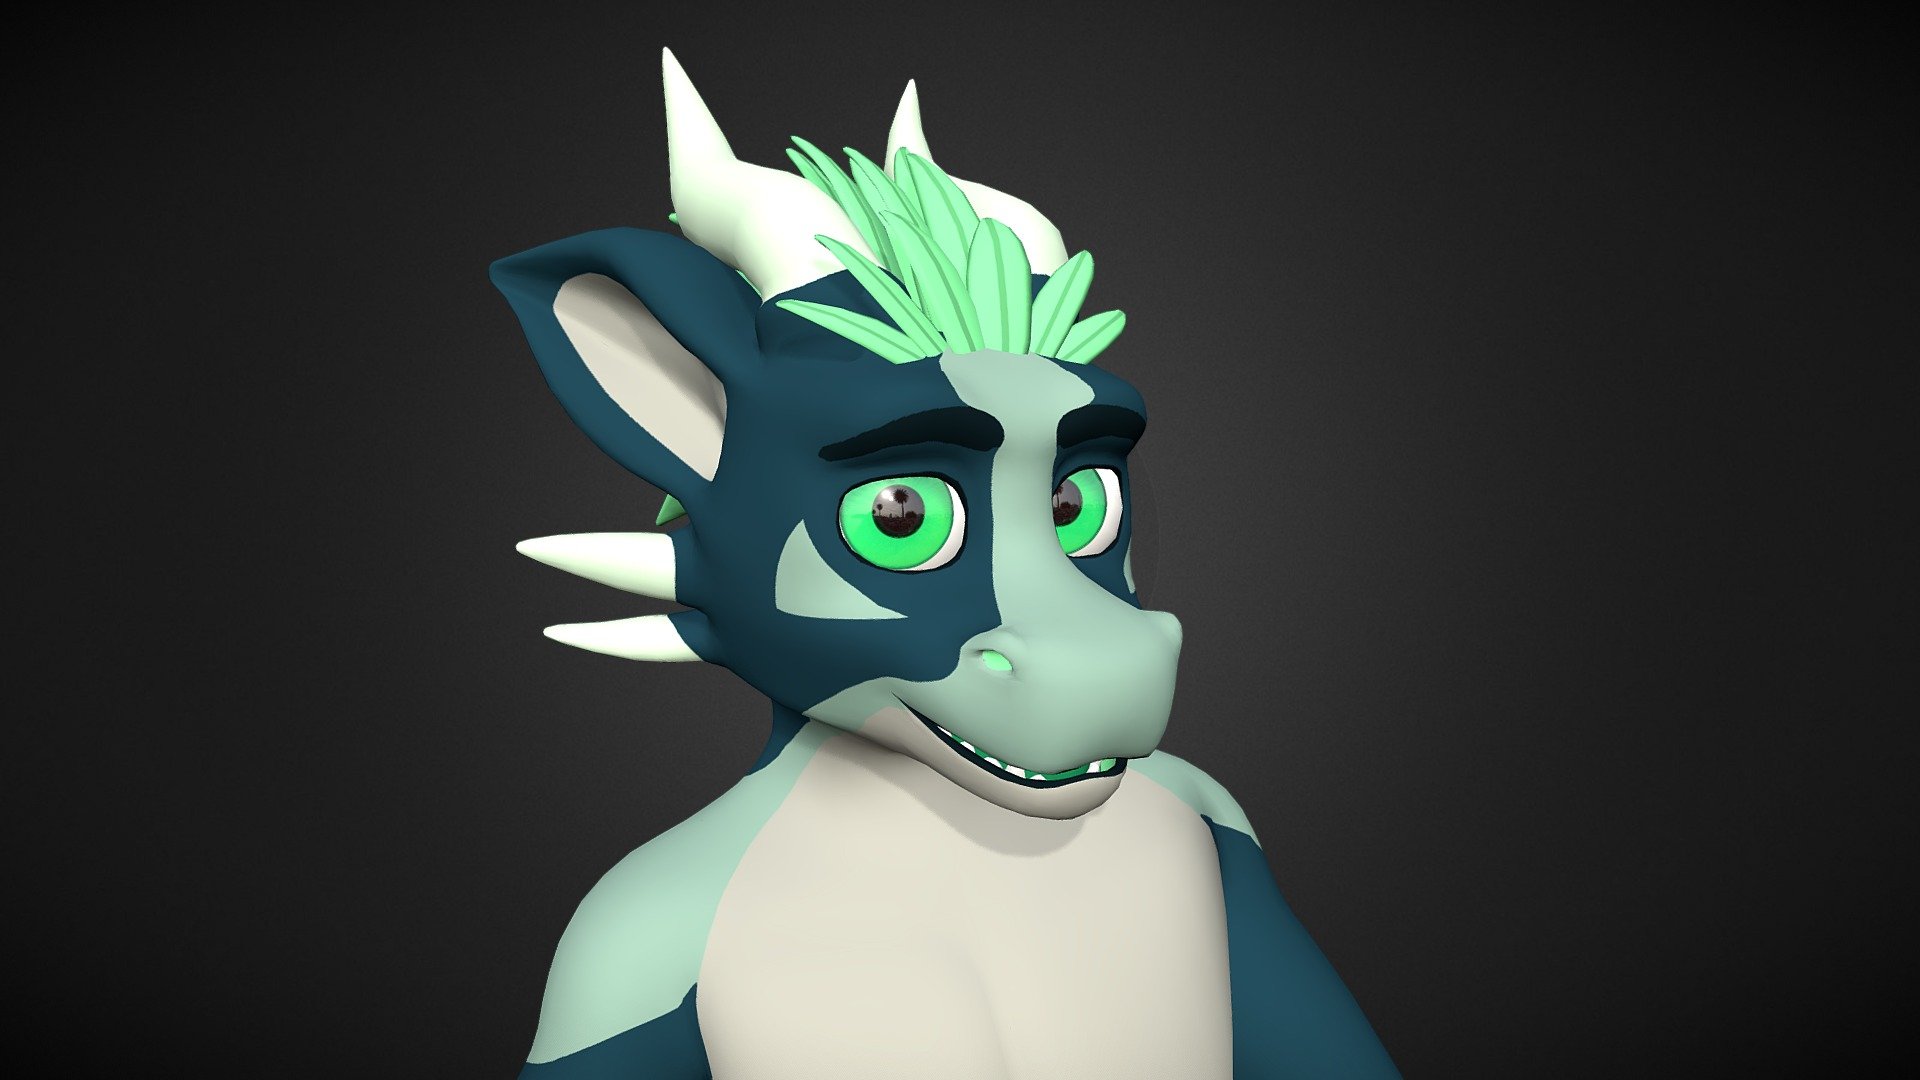 An Adoptable made for use in VR Chat and for a ref sheet!

Find this and more of my work on my twitter:@kaideart - Valen - 3D model by Kaide 3d model